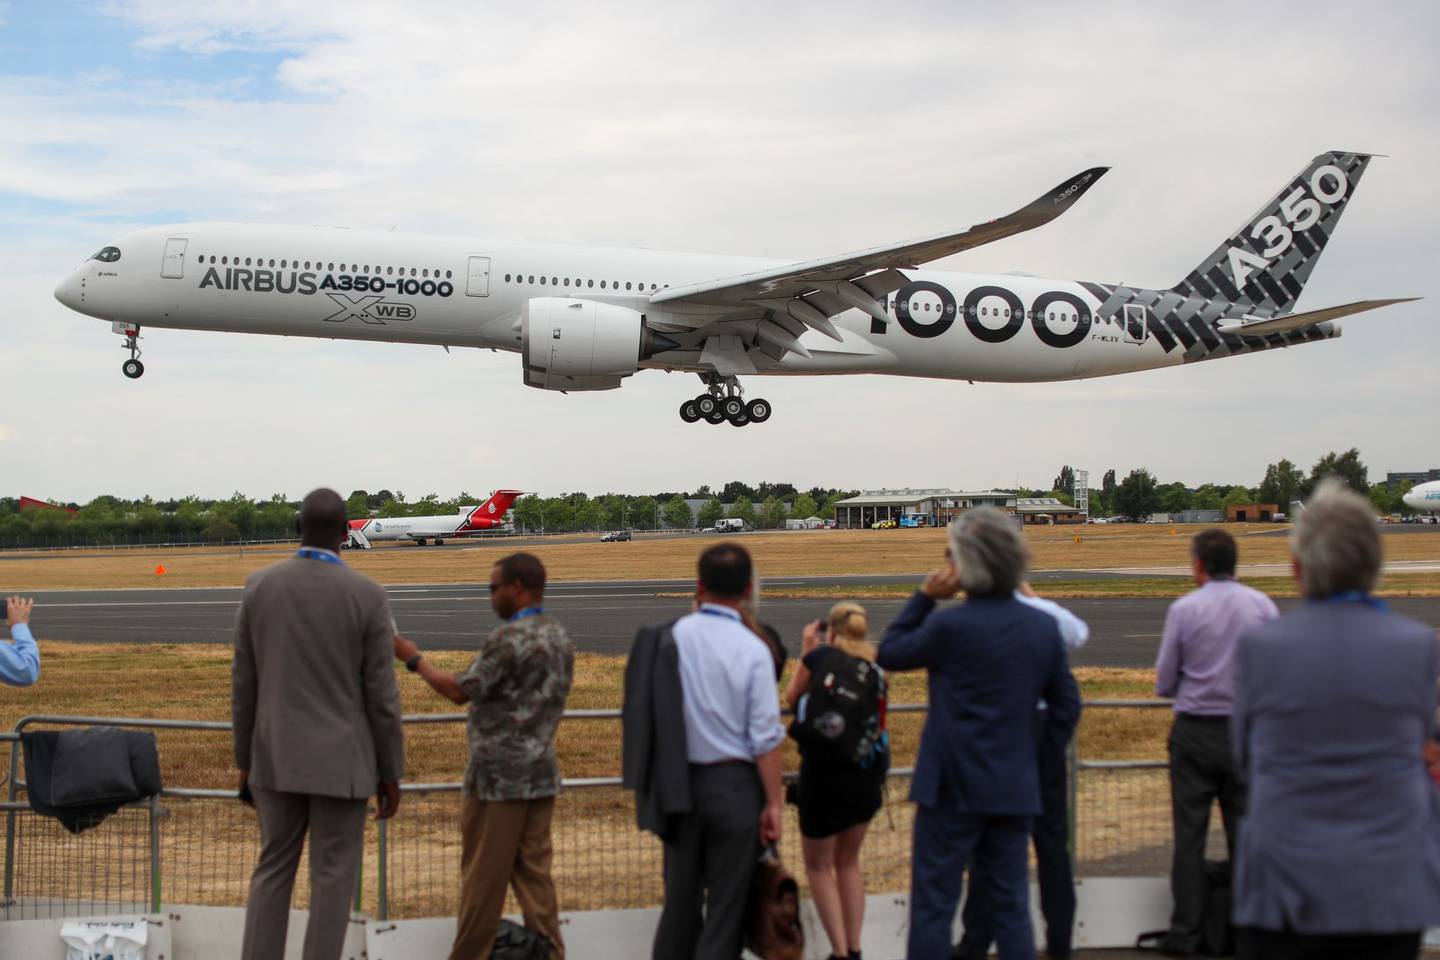 Spectators watch an Airbus SE A350-1000 aircraft land on the opening day of the Farnborough International Airshow (FIA) 2018 in Farnborough, U.K., on Monday, July 16, 2018. The air show, a biannual showcase for the aviation industry, runs until July 22.